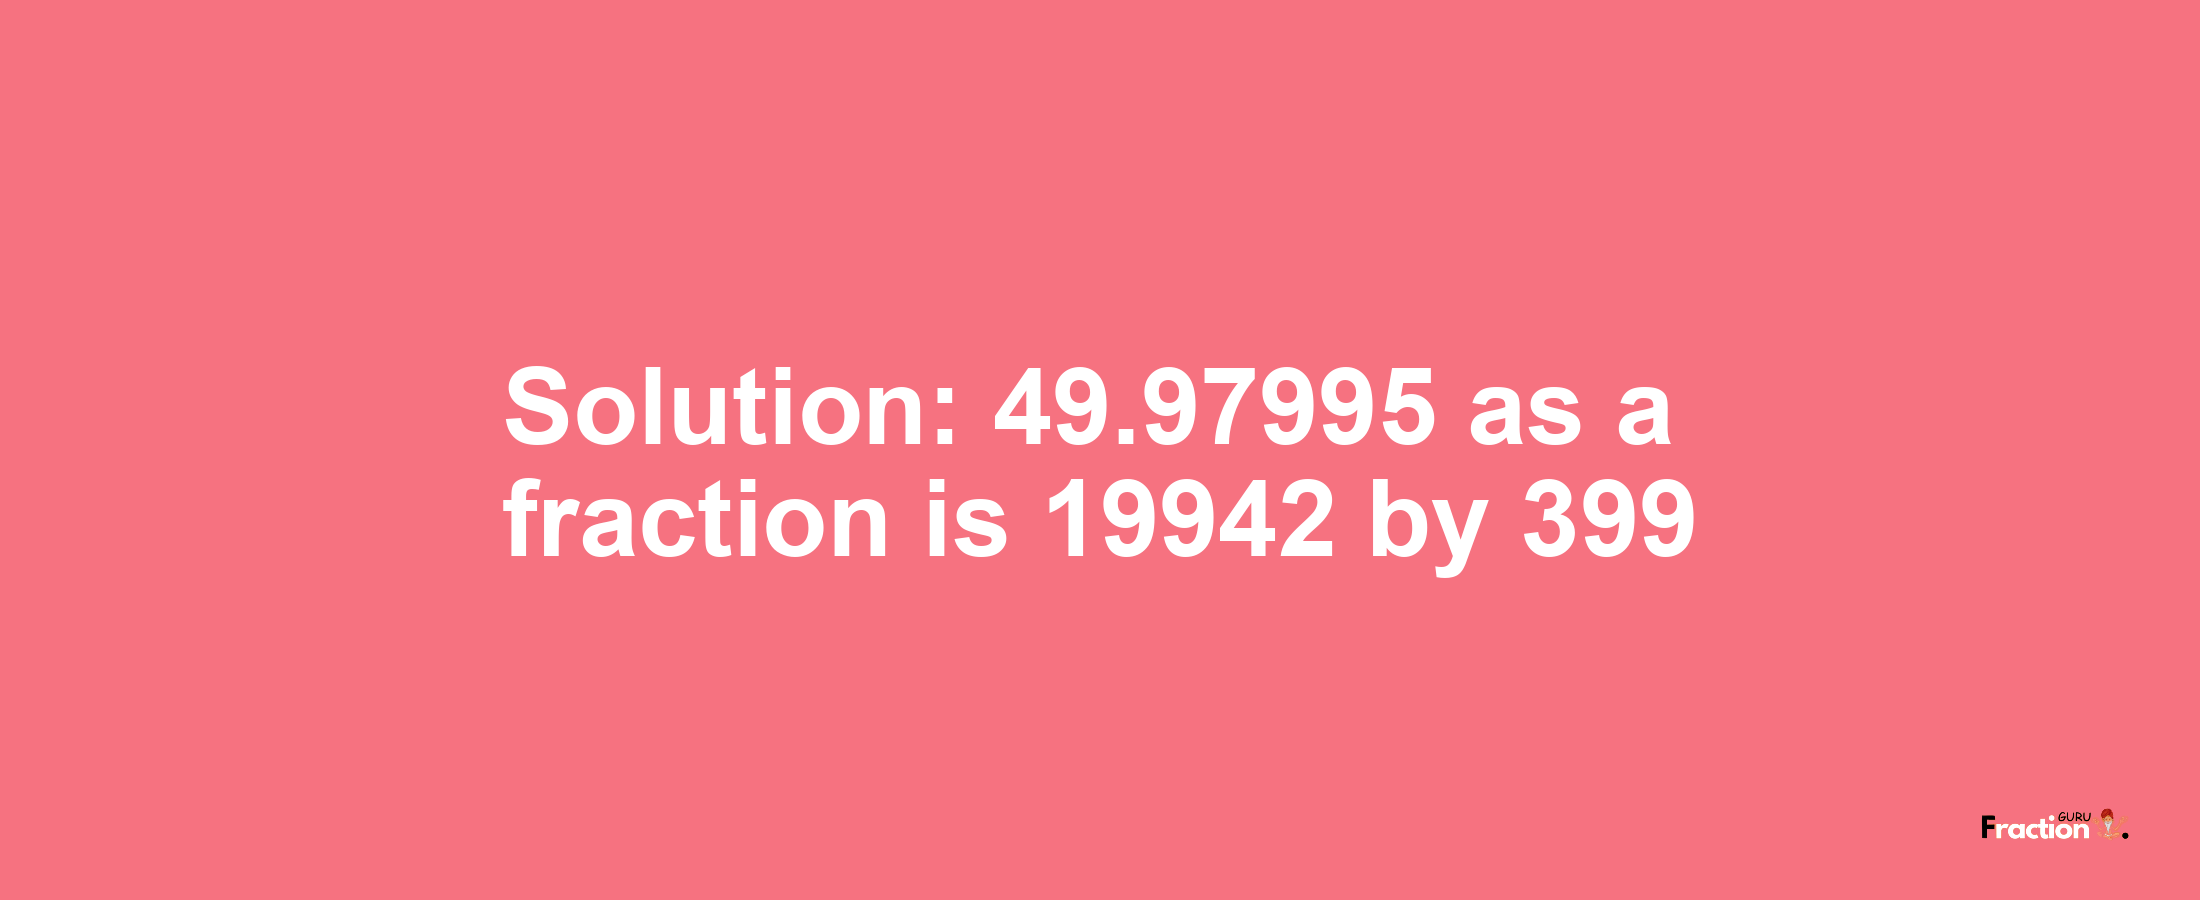 Solution:49.97995 as a fraction is 19942/399